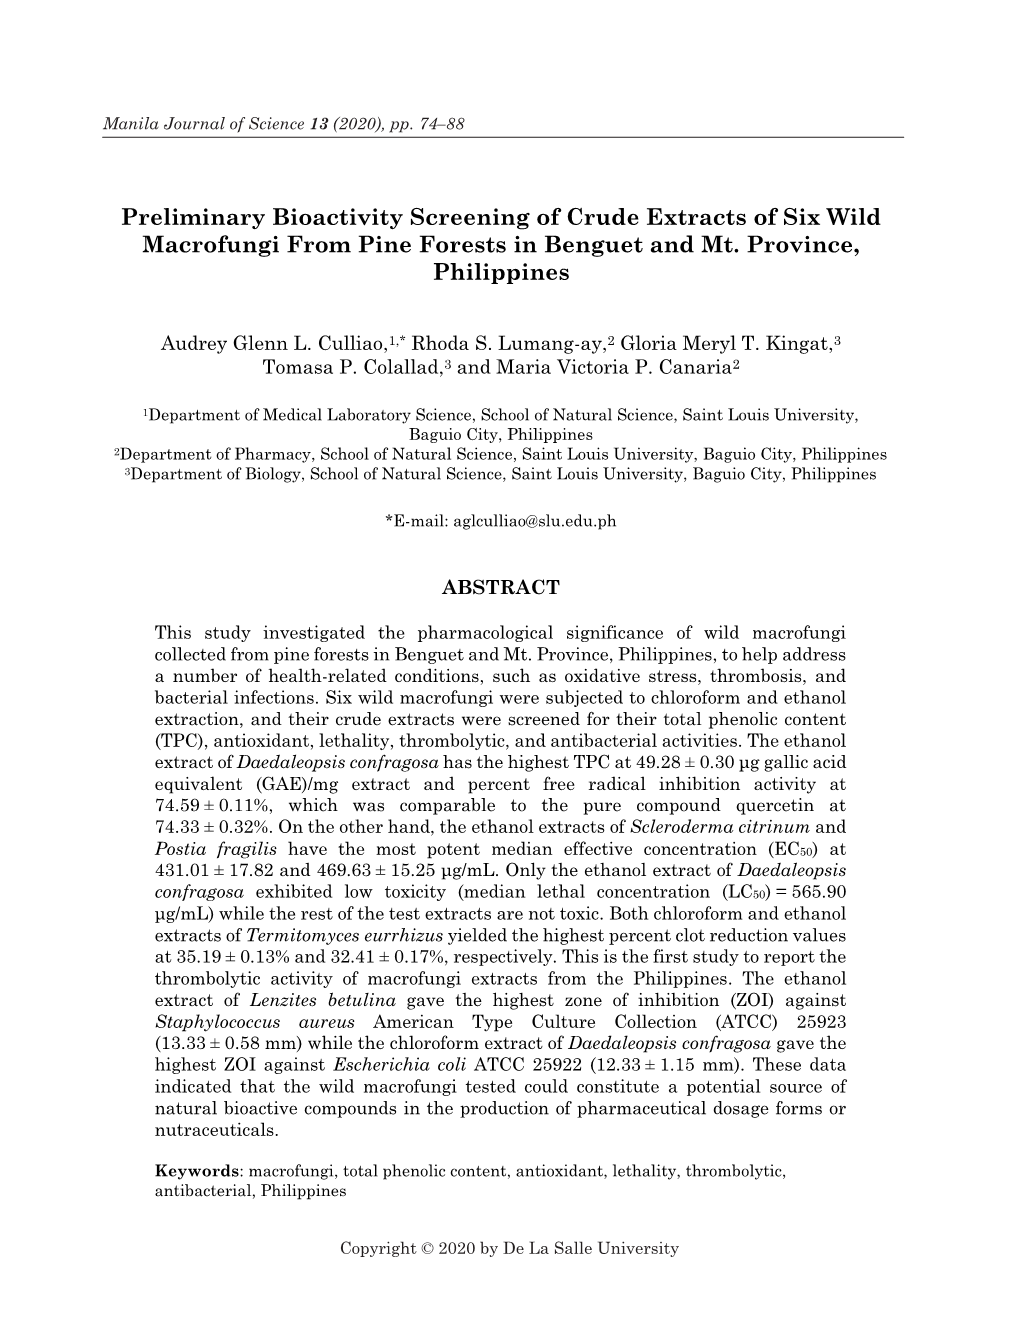 Preliminary Bioactivity Screening of Crude Extracts of Six Wild Macrofungi from Pine Forests in Benguet and Mt